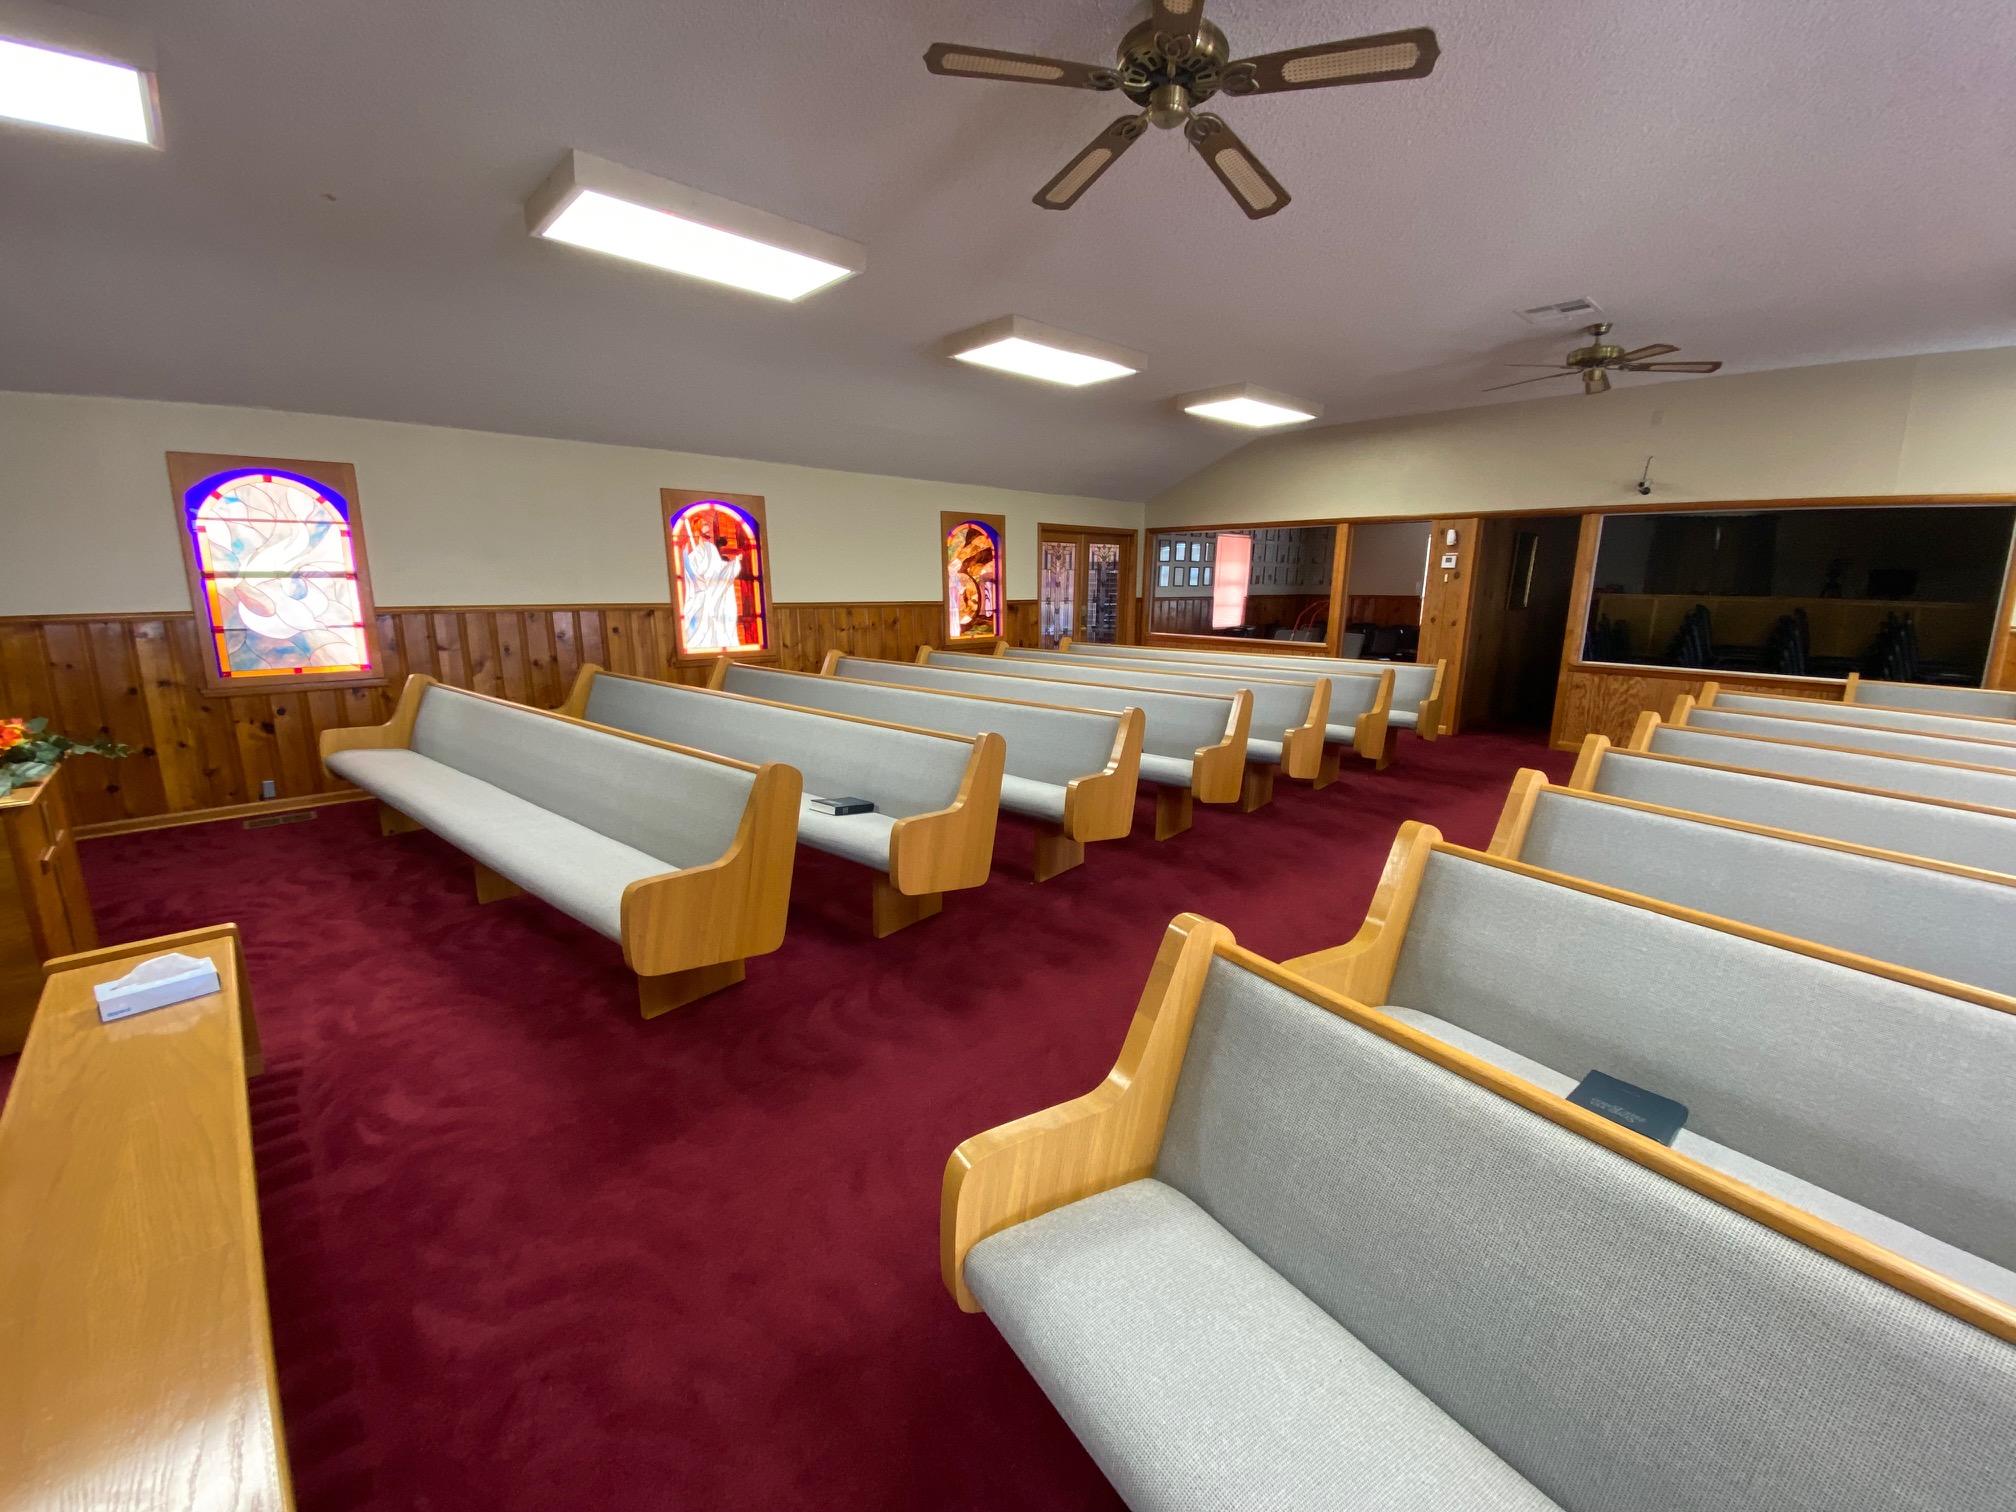 Onsite Pew upholstery from Woods Church Interiors in Atwood, Oklahoma Pic 2